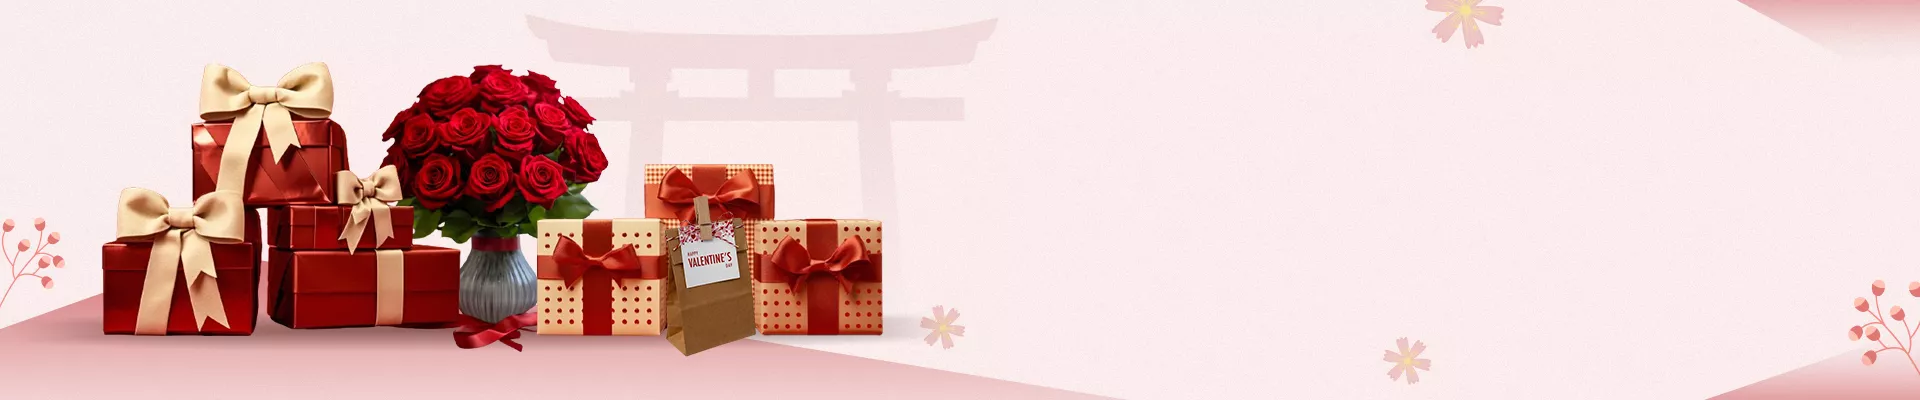 Send Valentines Day Gifts to Japan